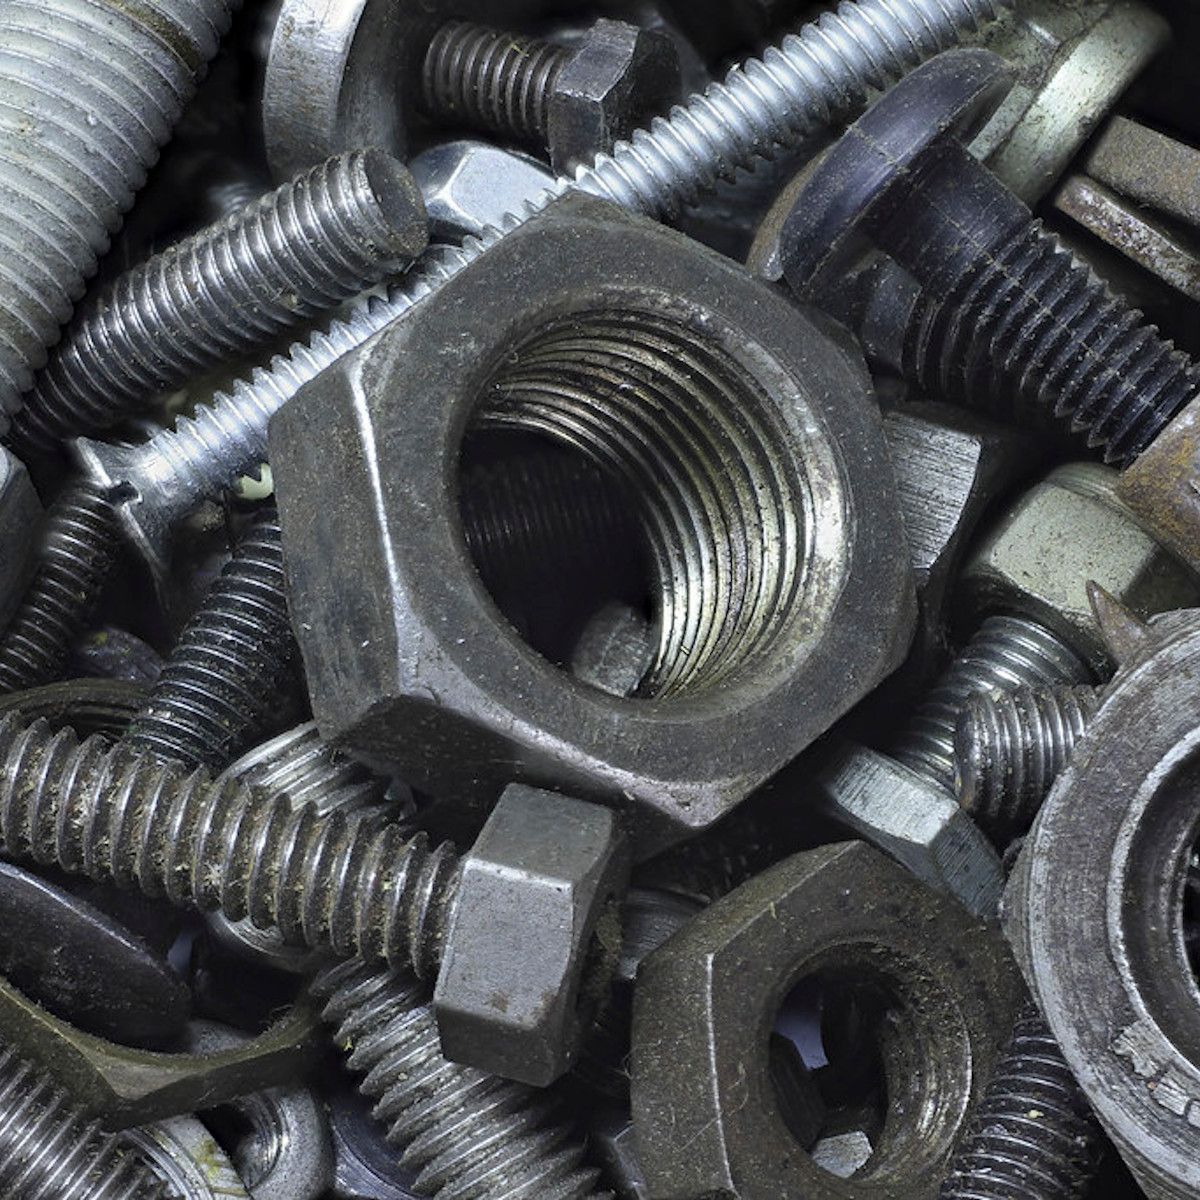 The invention of the screw was over 2300 years ago. Yet this simple object remains the fastener in nearly every modern-day invention. This week we unwind the history and importance of ingenious and deceptively simple devices in: “Nuts and Bolts”. bit.ly/4b5VFUu